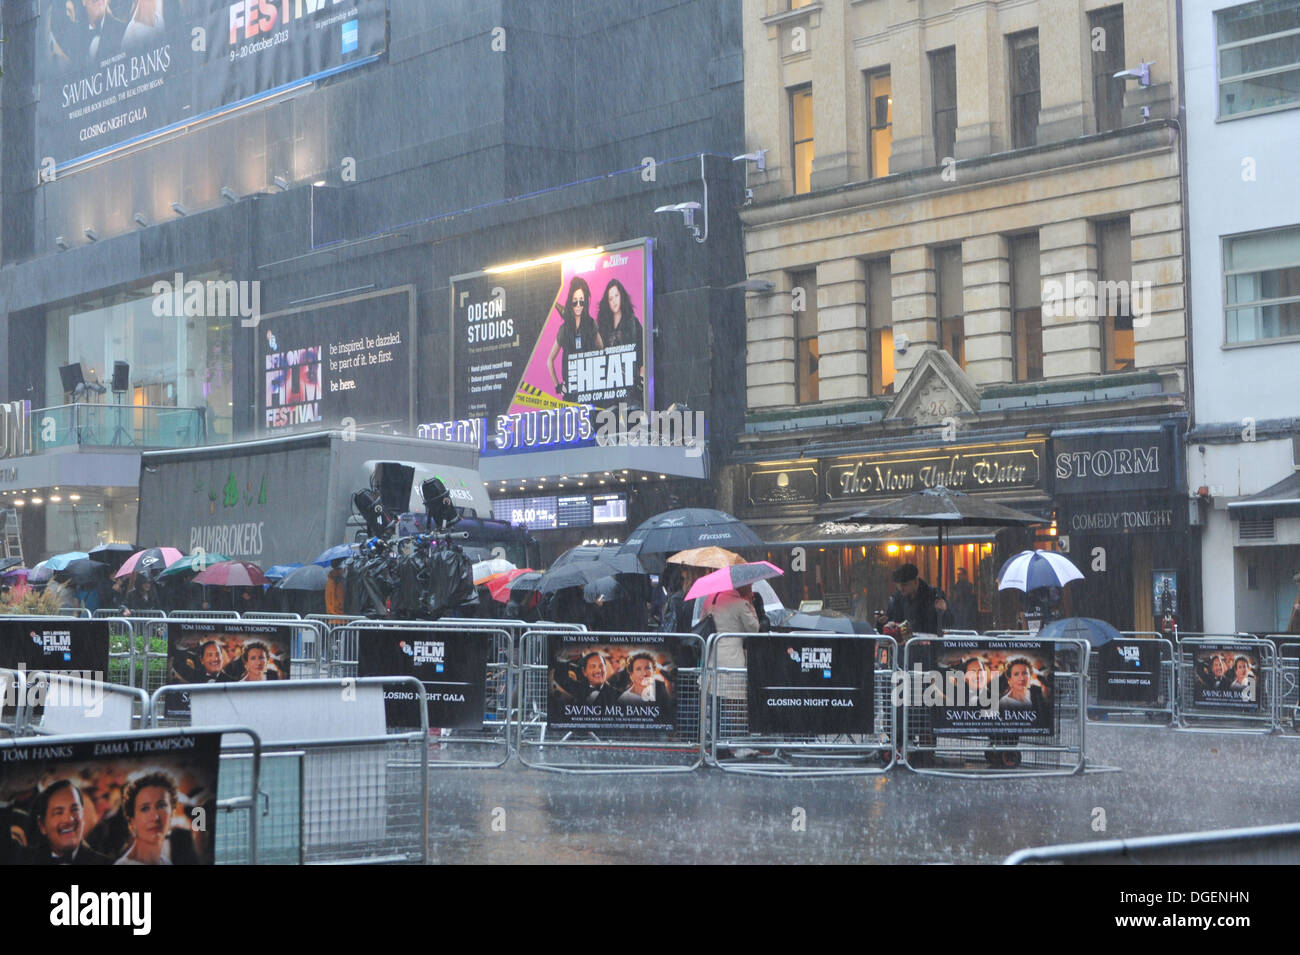 Leicester Square, London, UK. 20th October 2013. Film fans brave torrential rain in Leicester Square as they wait for tonight's closing gala of the British Film Festival, with the screening of Saving Mr Banks, starring Tom Hanks and Emma Thompson. Credit:  Matthew Chattle/Alamy Live News Stock Photo